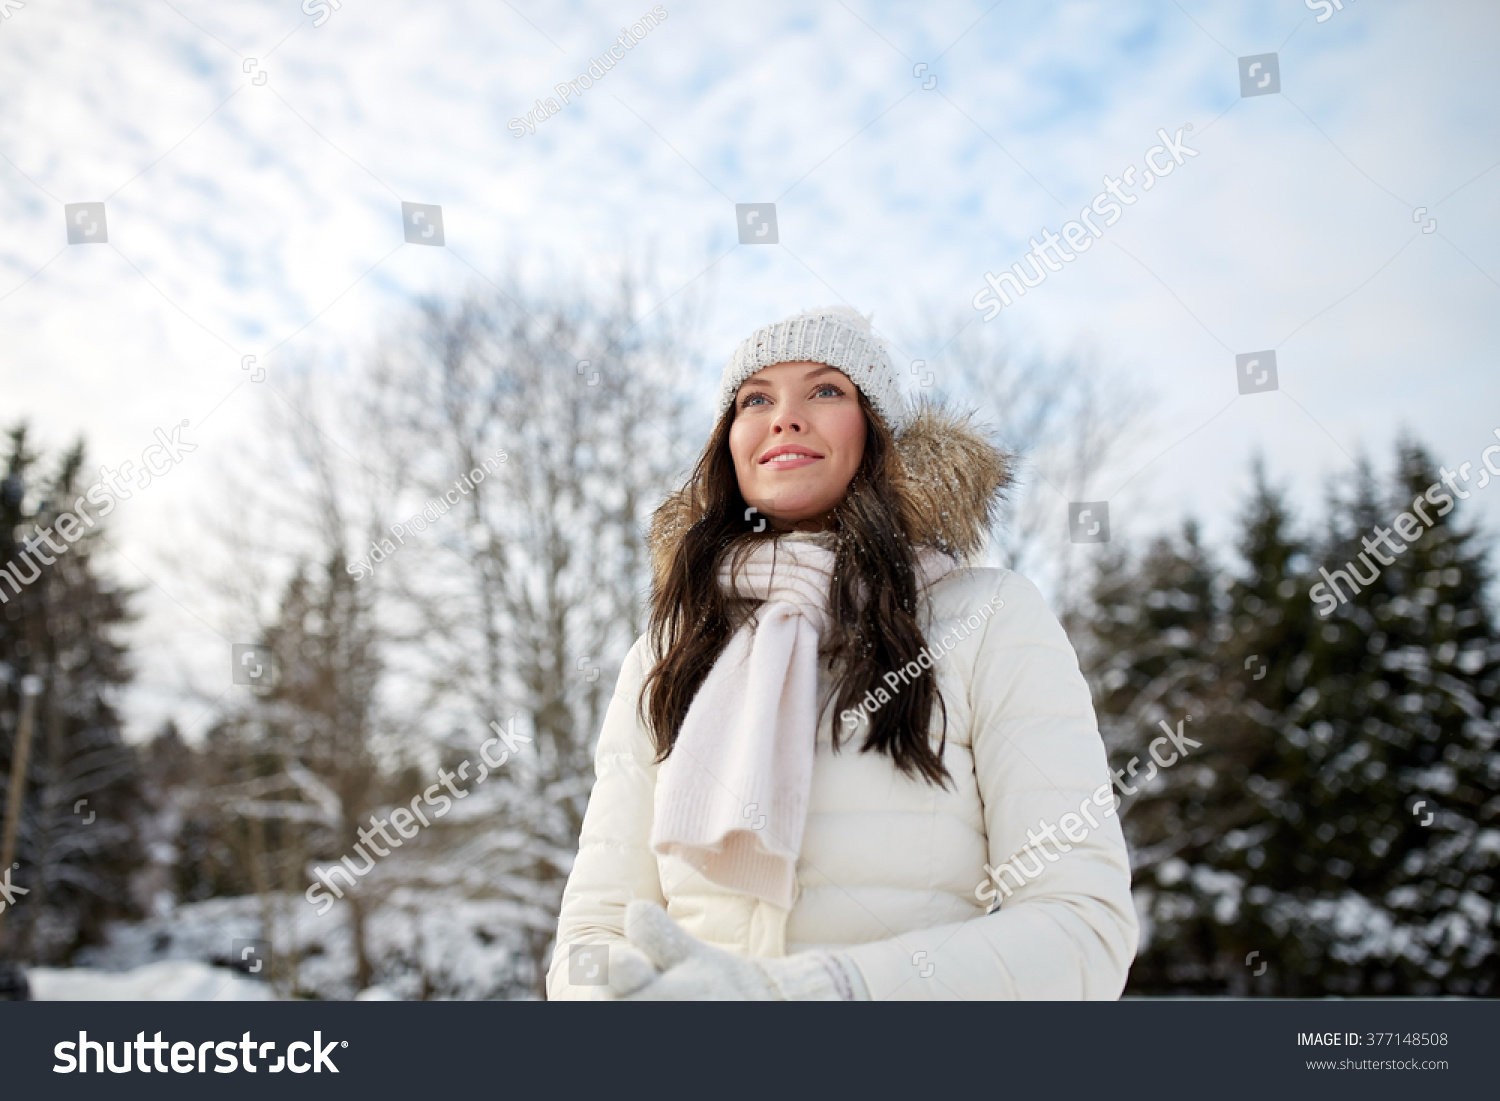 people, season and leisure concept - happy woman outdoors in winter #377148508